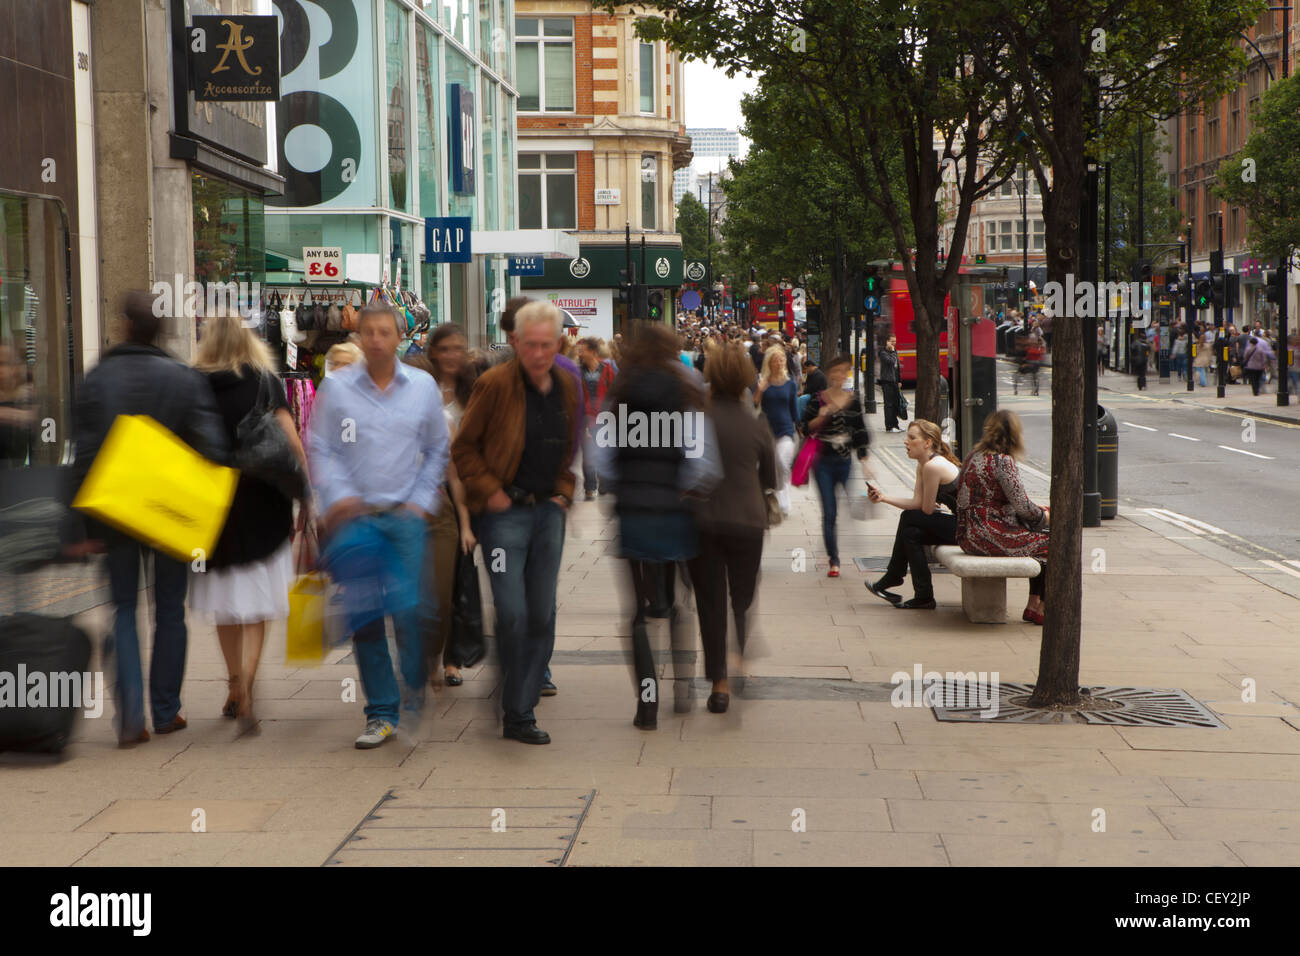 A view down Oxford street, with shoppers moving along the path Stock Photo